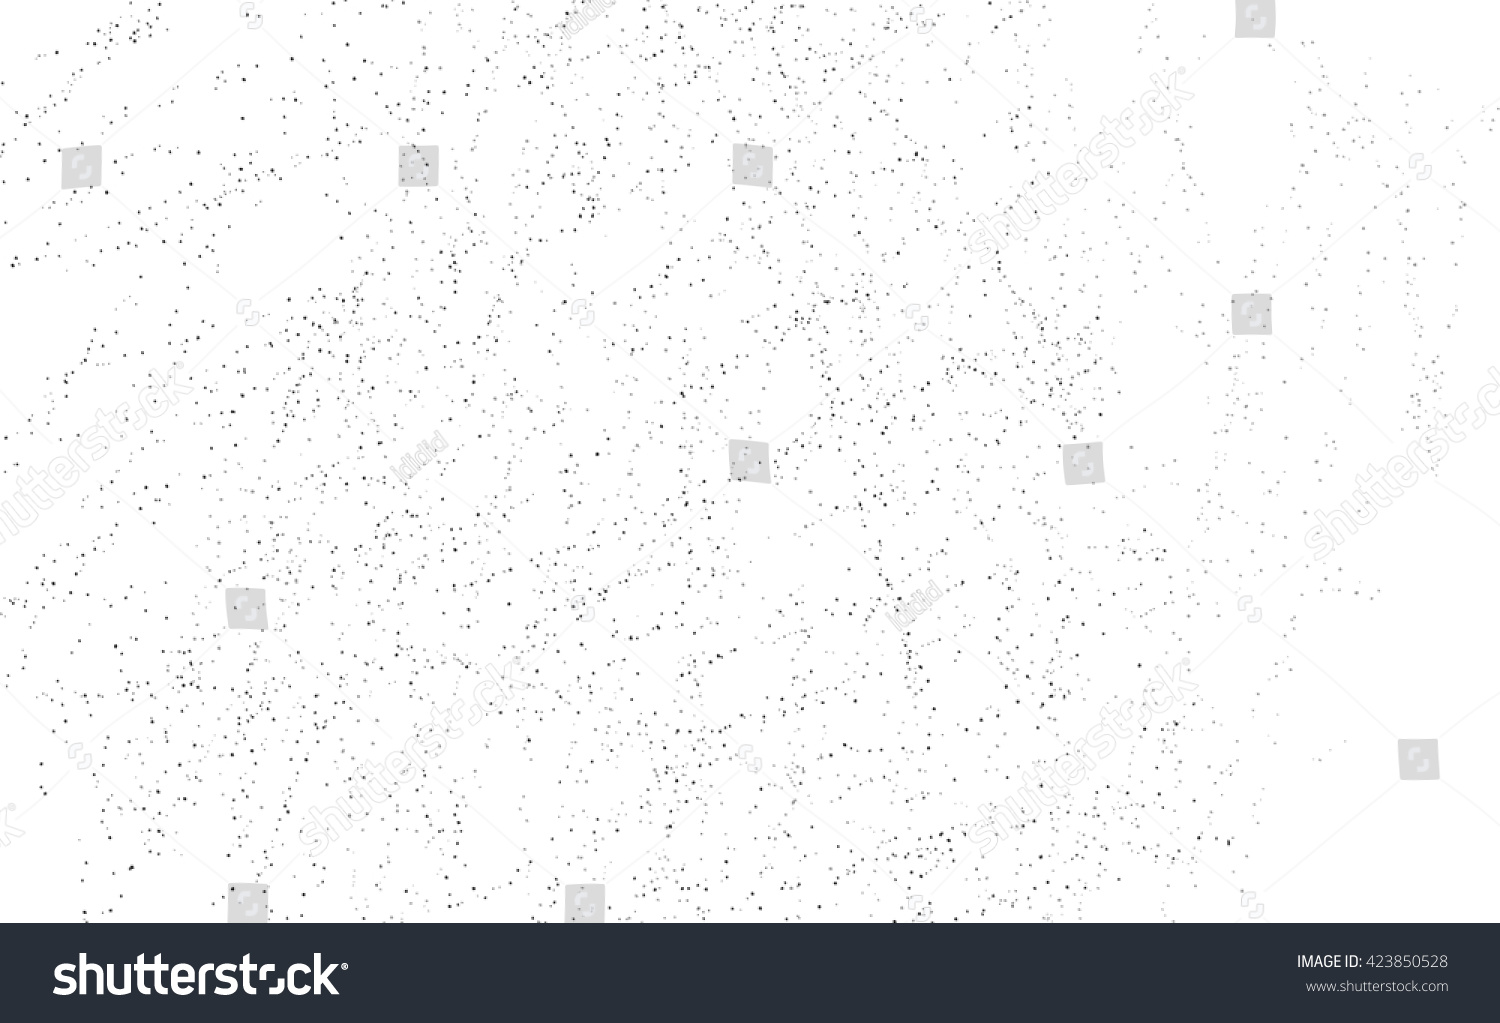 paint splash spray background image. abstract dots texture. noise spray texture background. Abstract Circles backgrounds. Scatter painting background images.
 #423850528